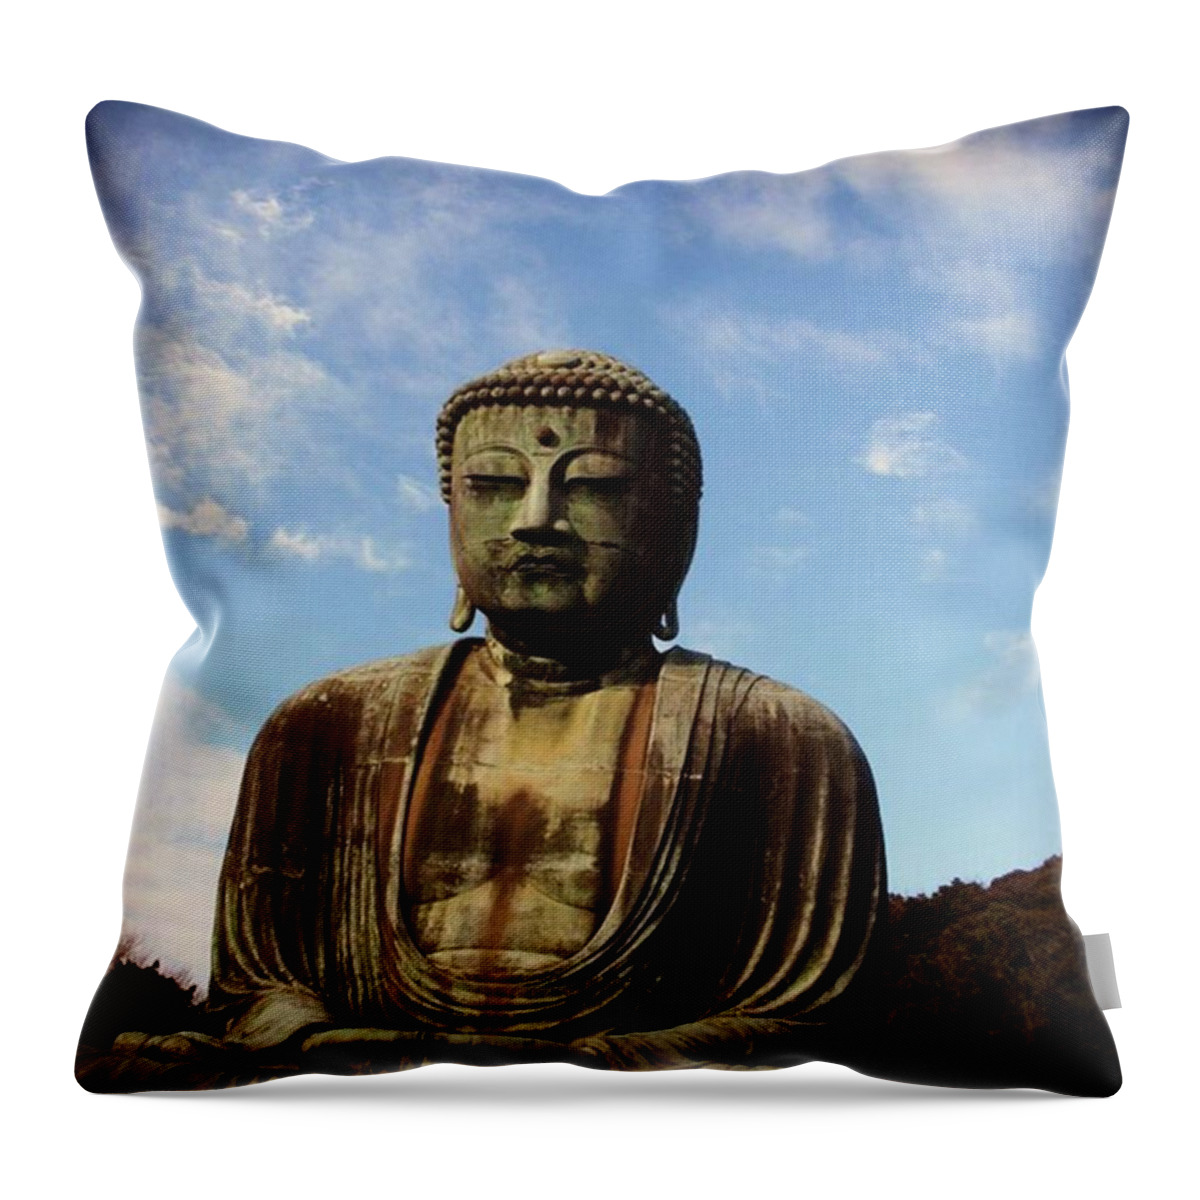 { Throw Pillow featuring the photograph Daibutsu In Kamakura. by Emi Kanno